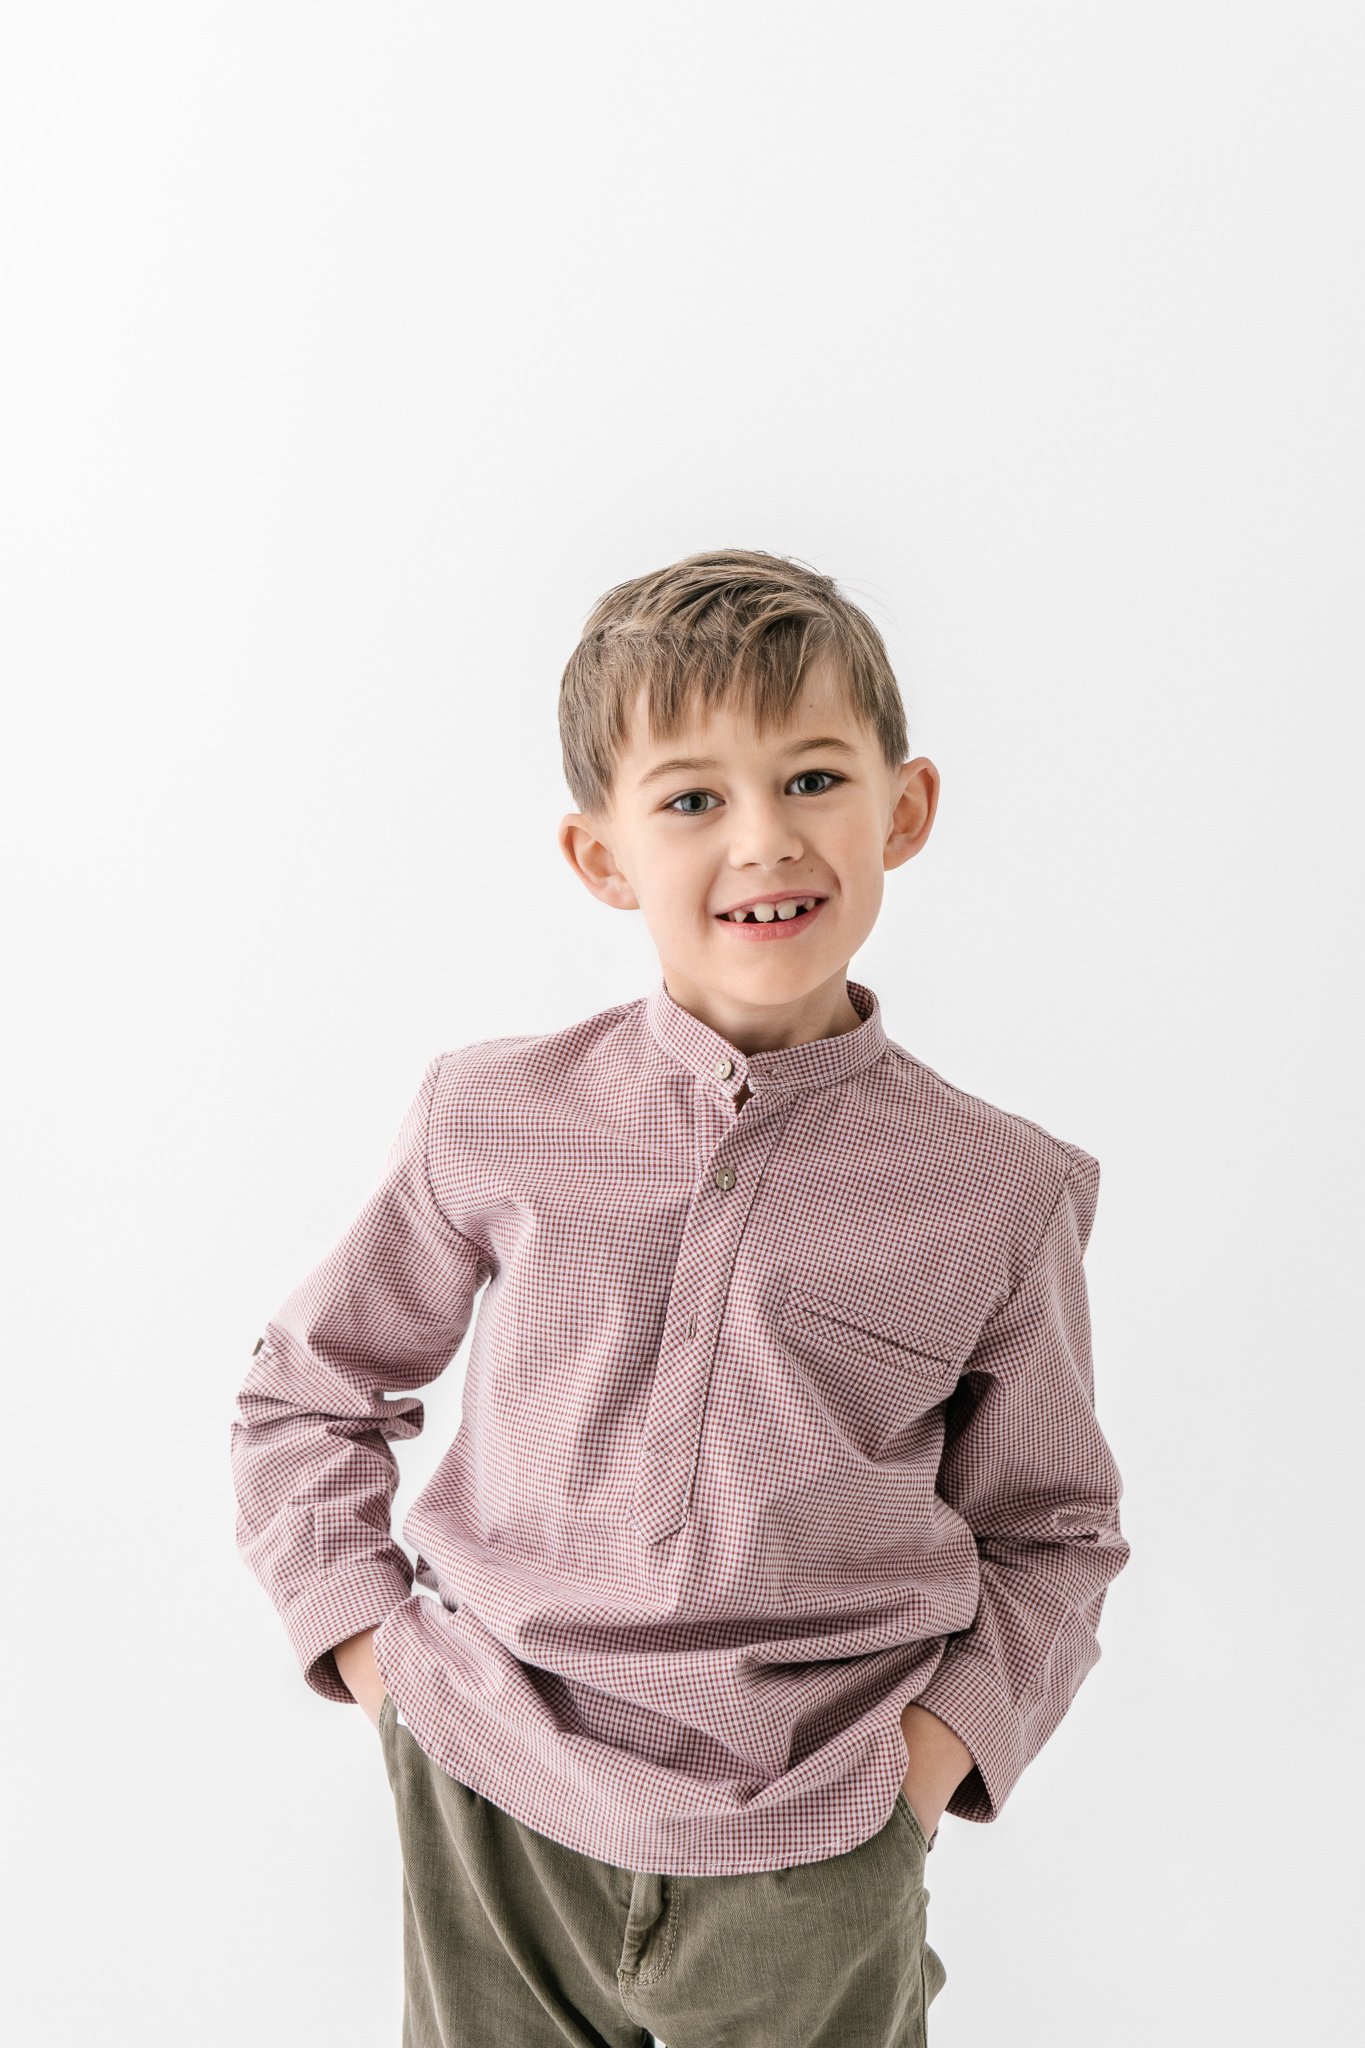  Studio portrait of a big brother in his button-down shirt by Nicole Hawkins Photography. studio portraits family portraits #NicoleHawkinsPhotography #NicoleHawkinsFamily #Newborns #MaplewoodNJ #studiofamilyportraits #modernfamilyportraits 